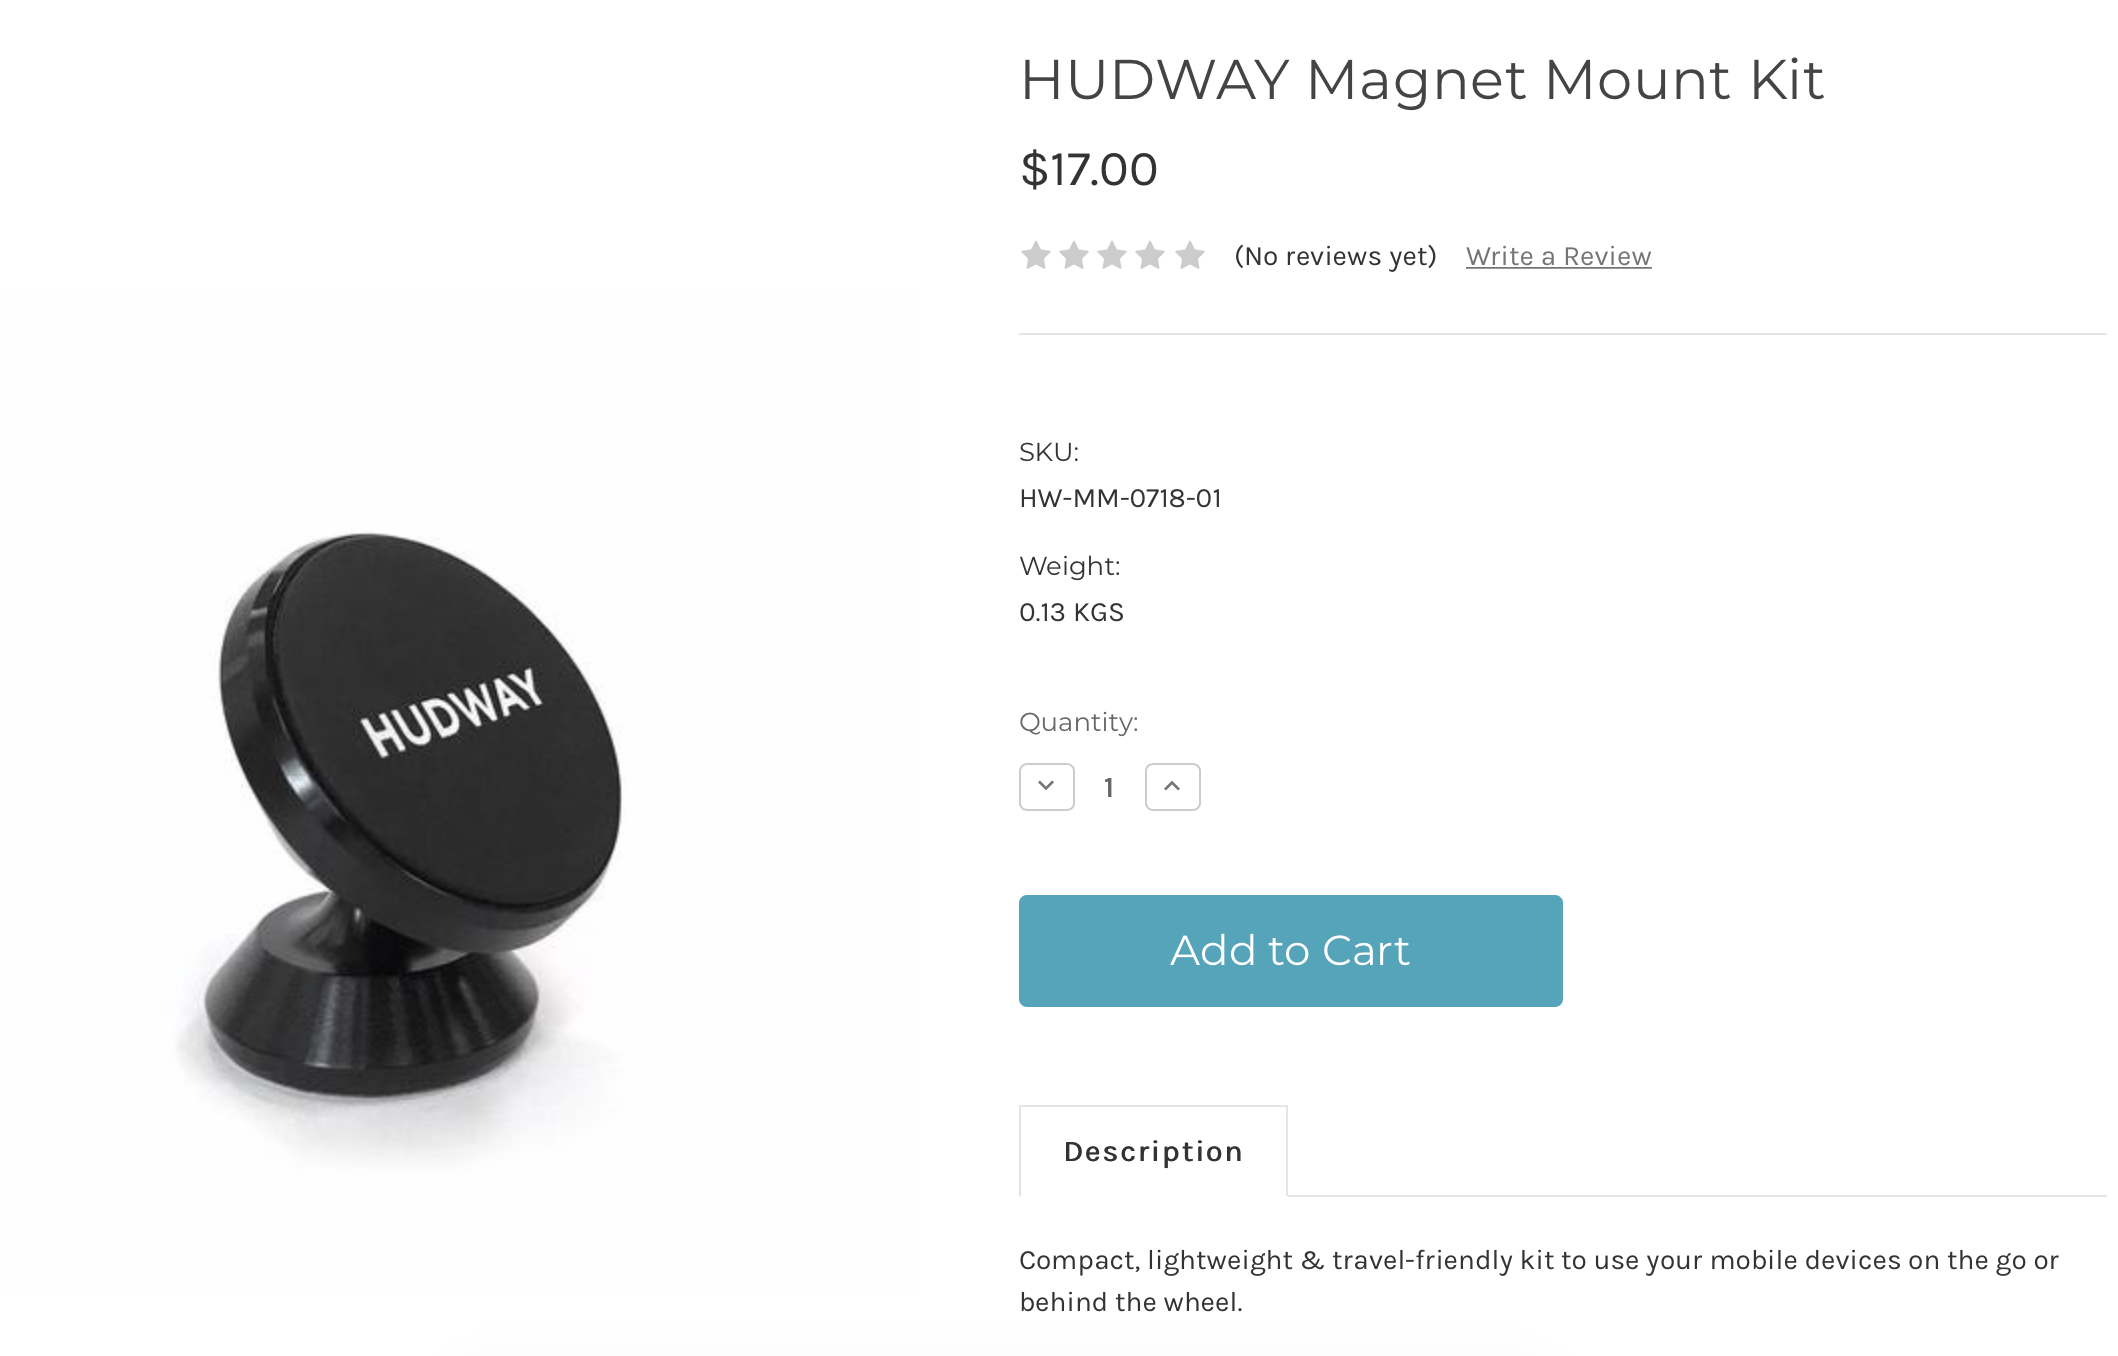 HUDWAY Magnet Mount Kit listing on HUDWAY Store